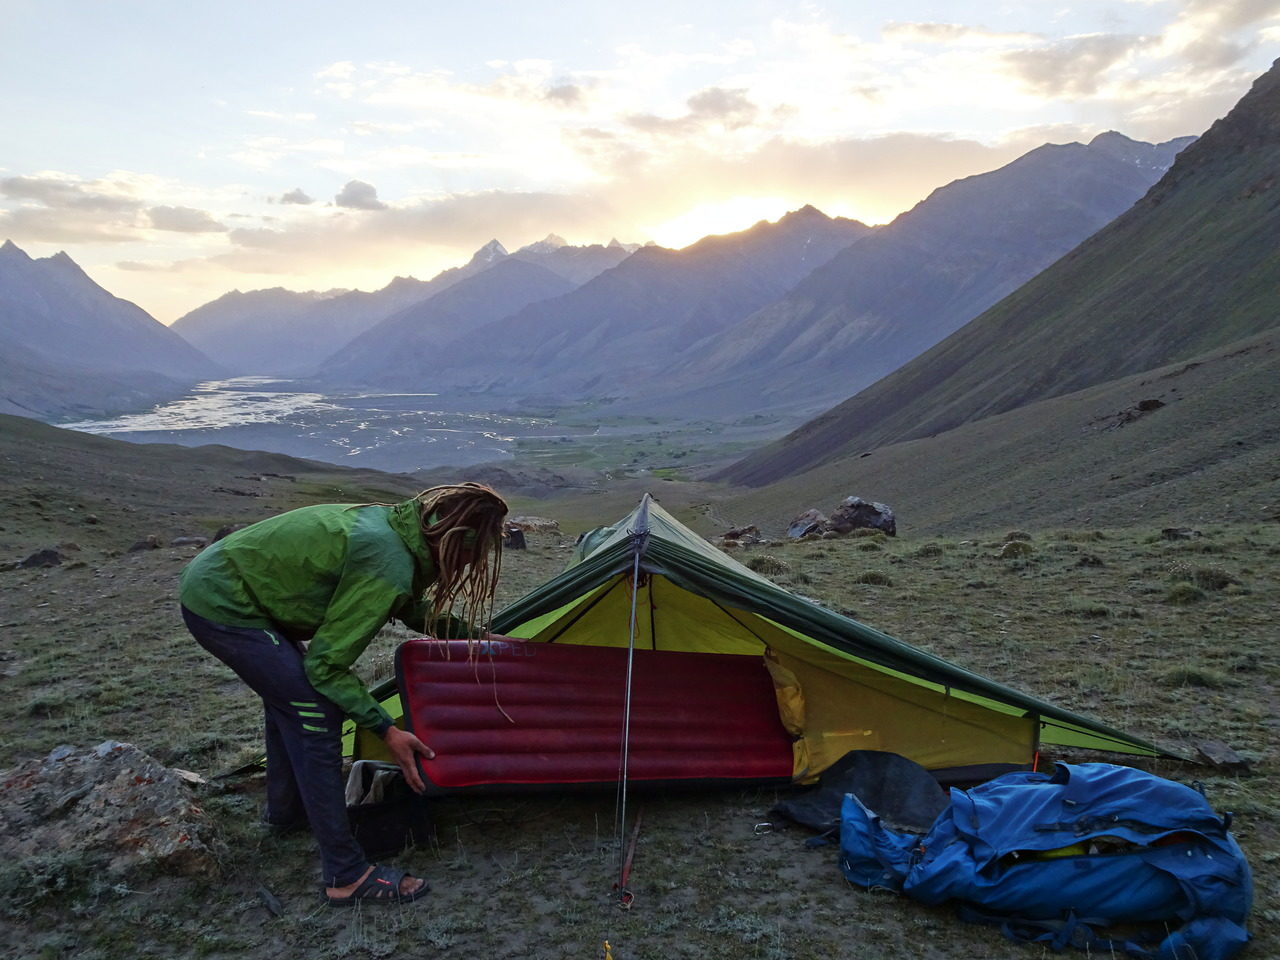 Expedition equipment from Exped: Vela I Extreme (tent), SynMat TT 9 M (mat) and Explore 75 (backpack)